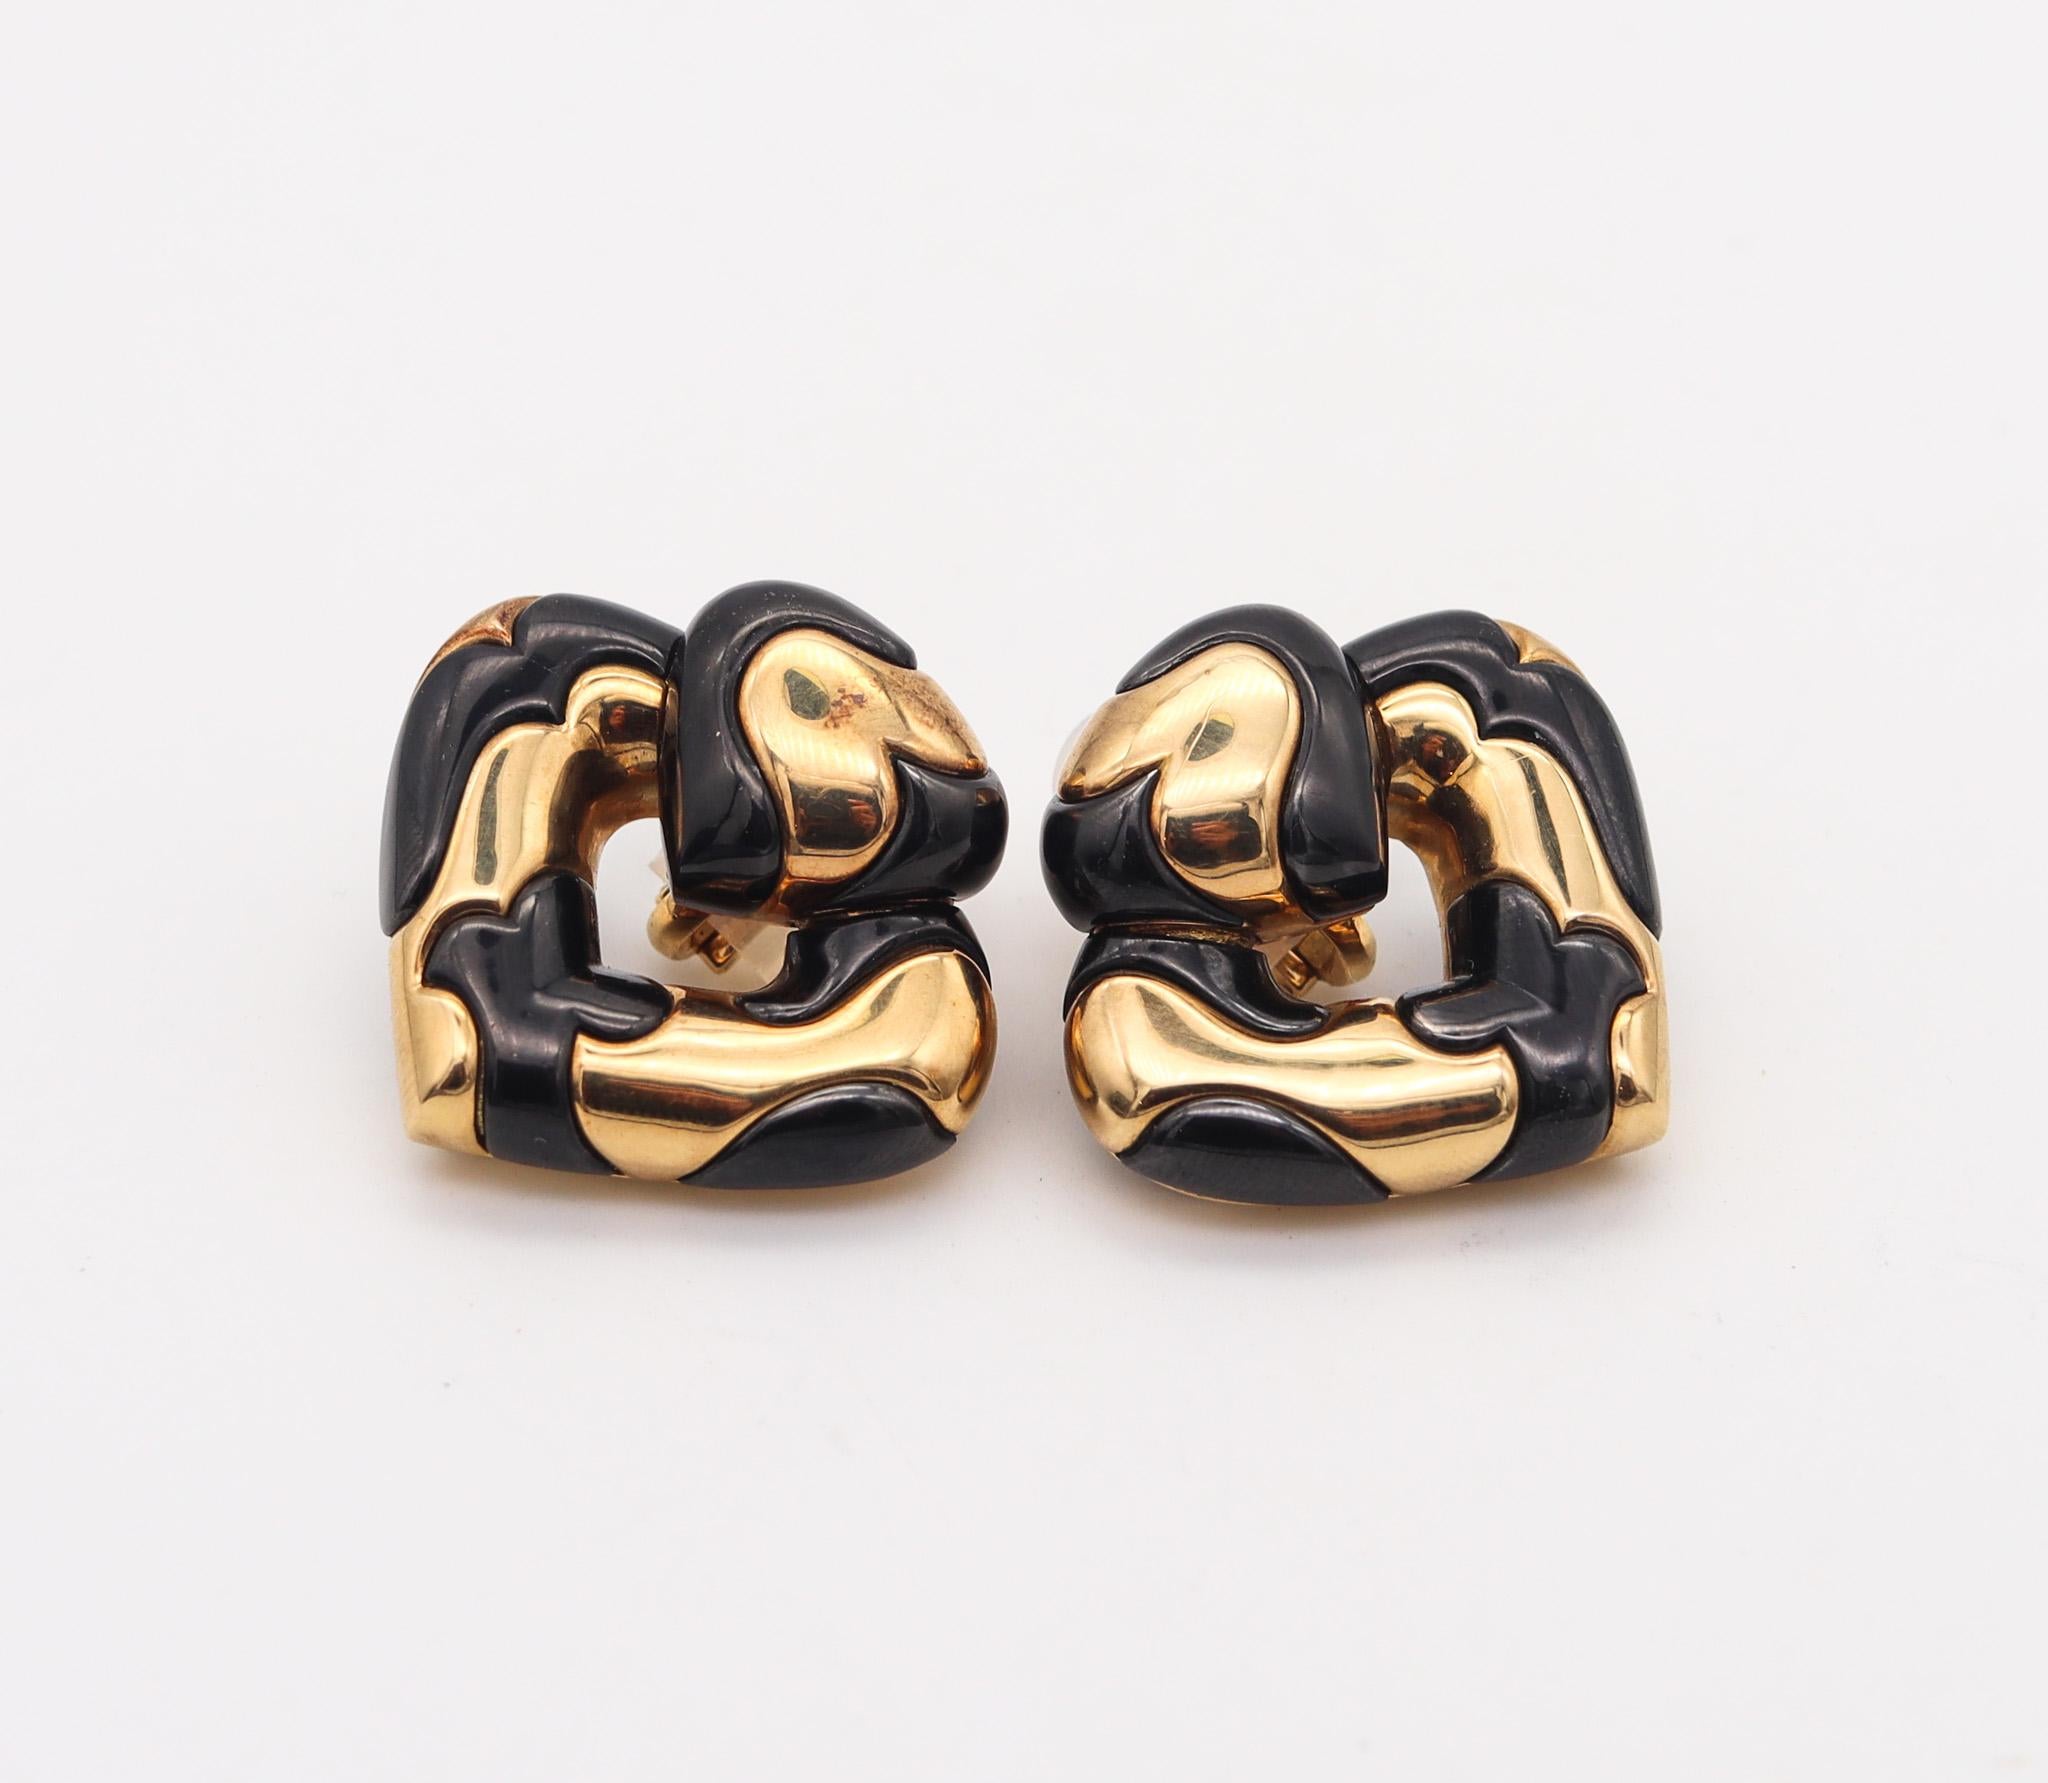 Pardy Mari earrings designed by Marina B.

A large statement pair of clips-on earrings created in Milano Italy by Marina Bvlgari, back in the 1987. These earrings are part of the iconic collection named Pardy Mari and has been made up with free